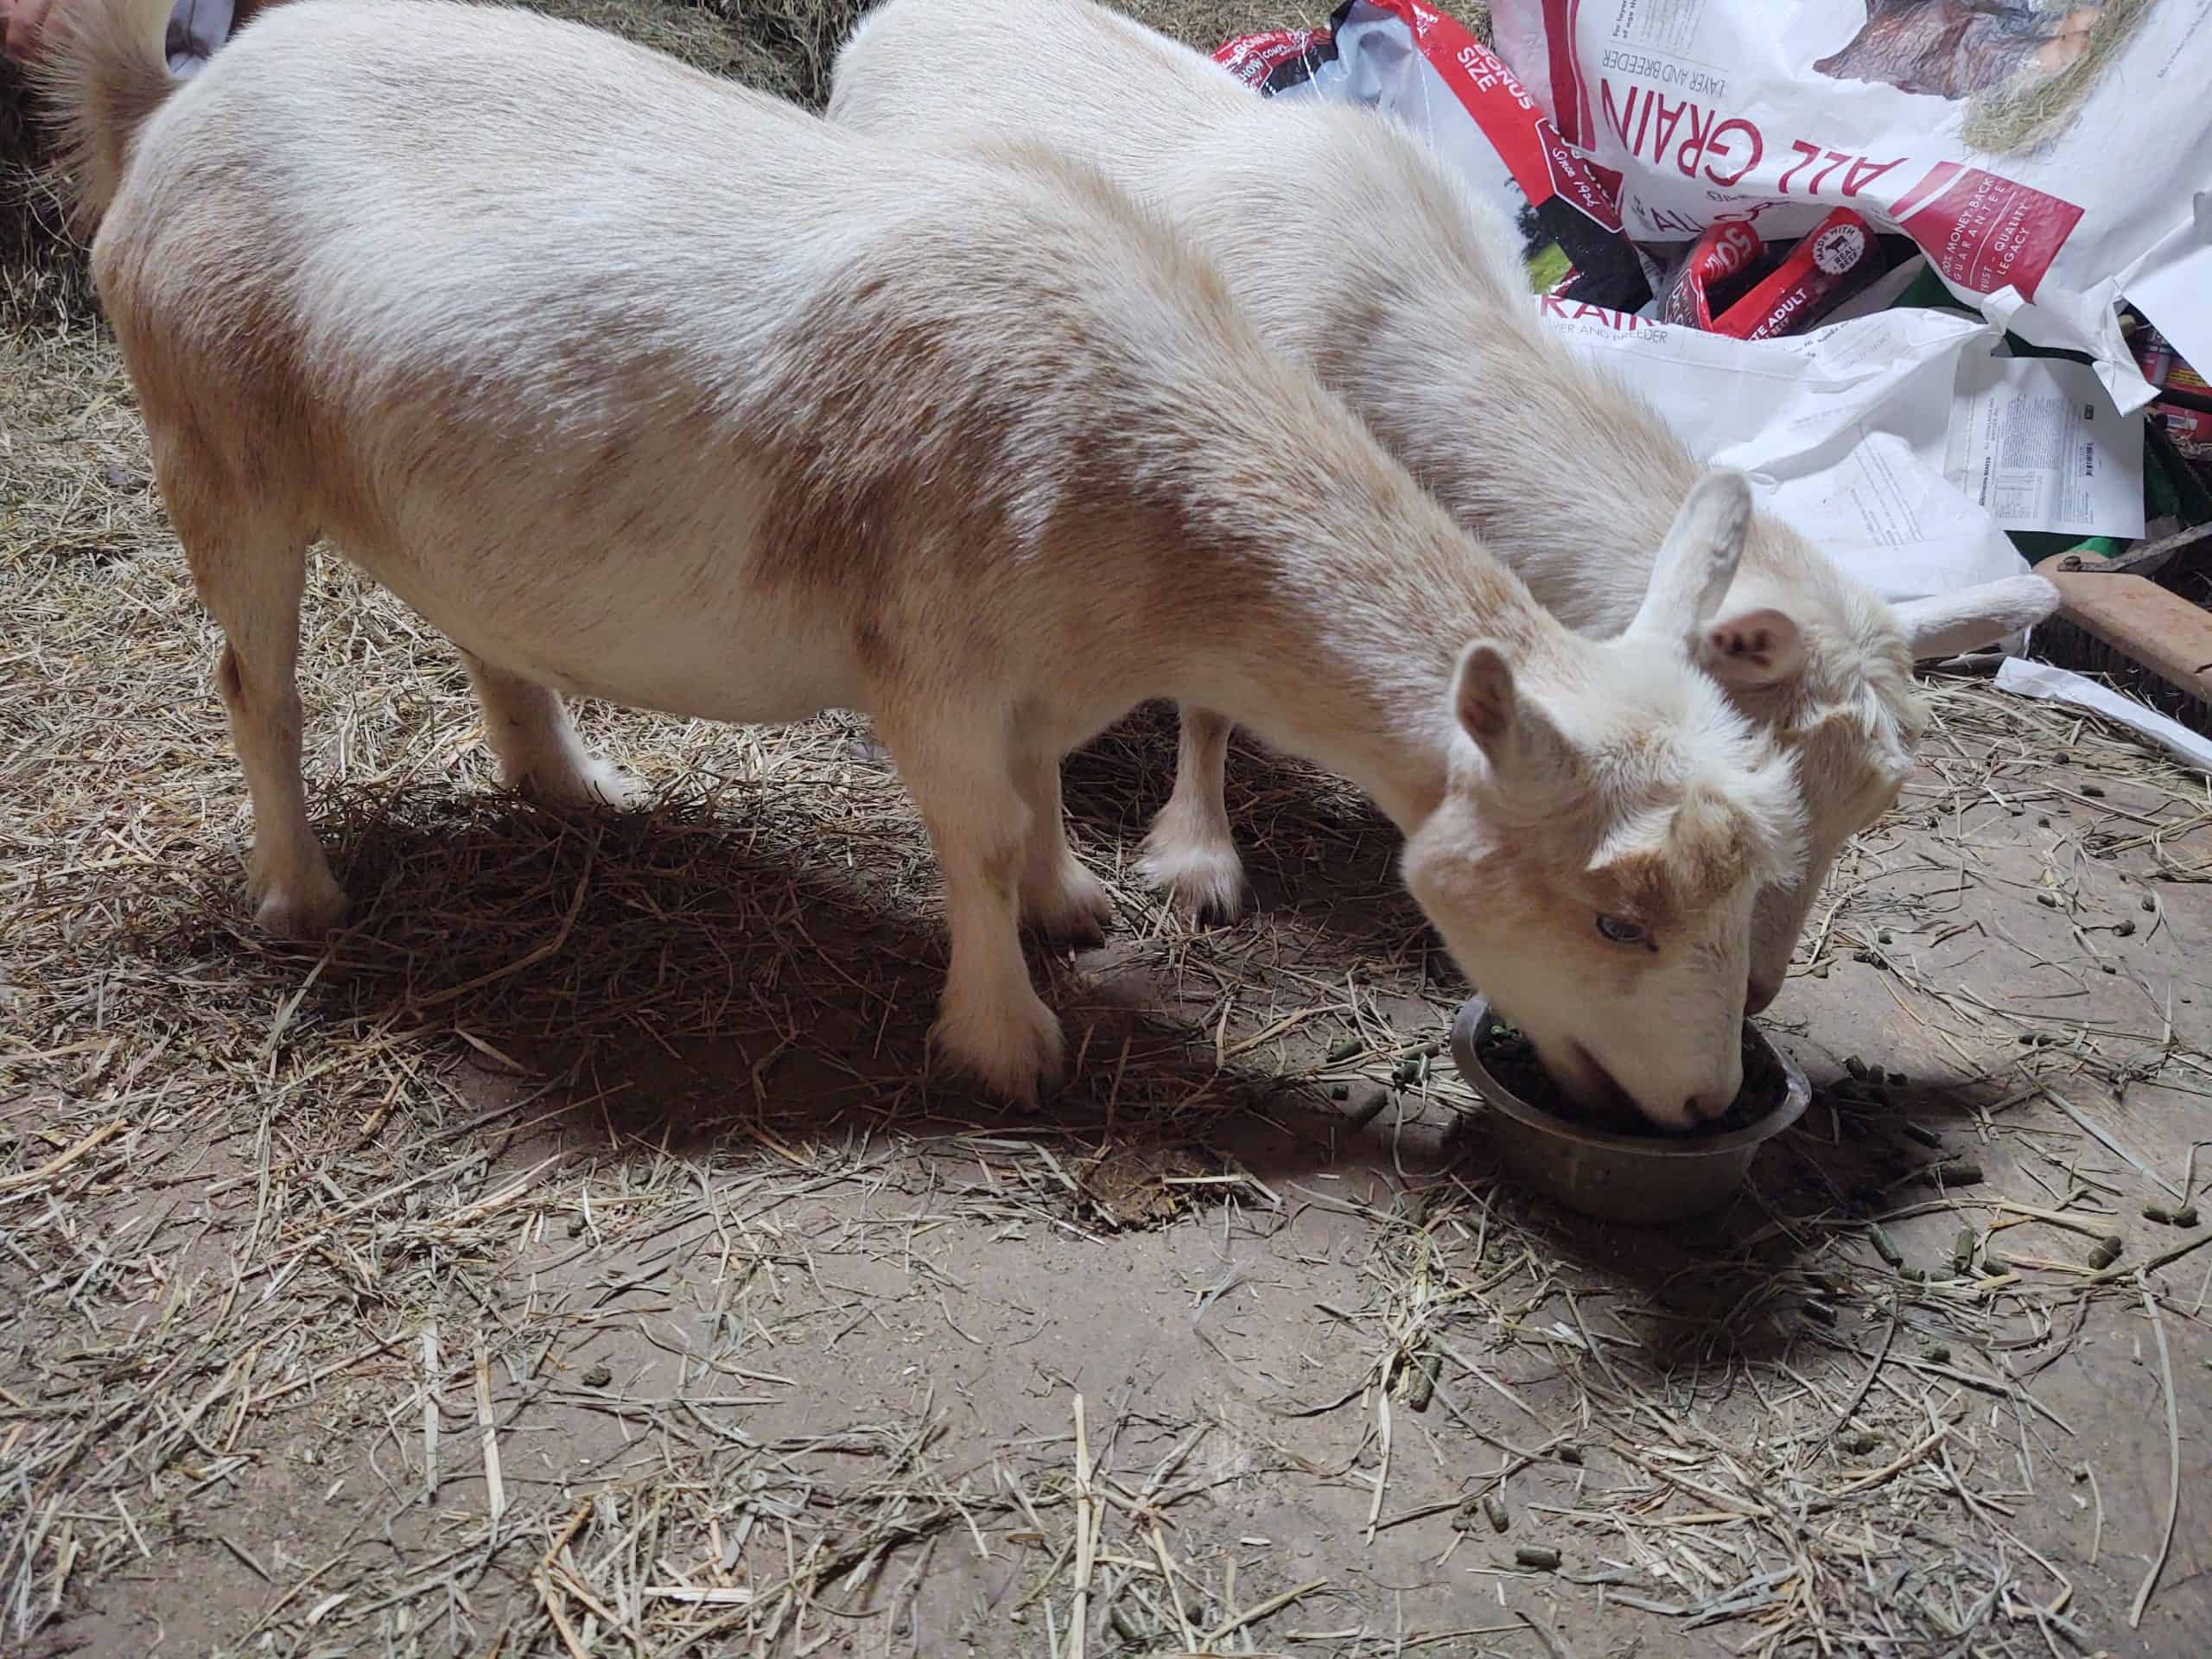 goats eating from a bowl